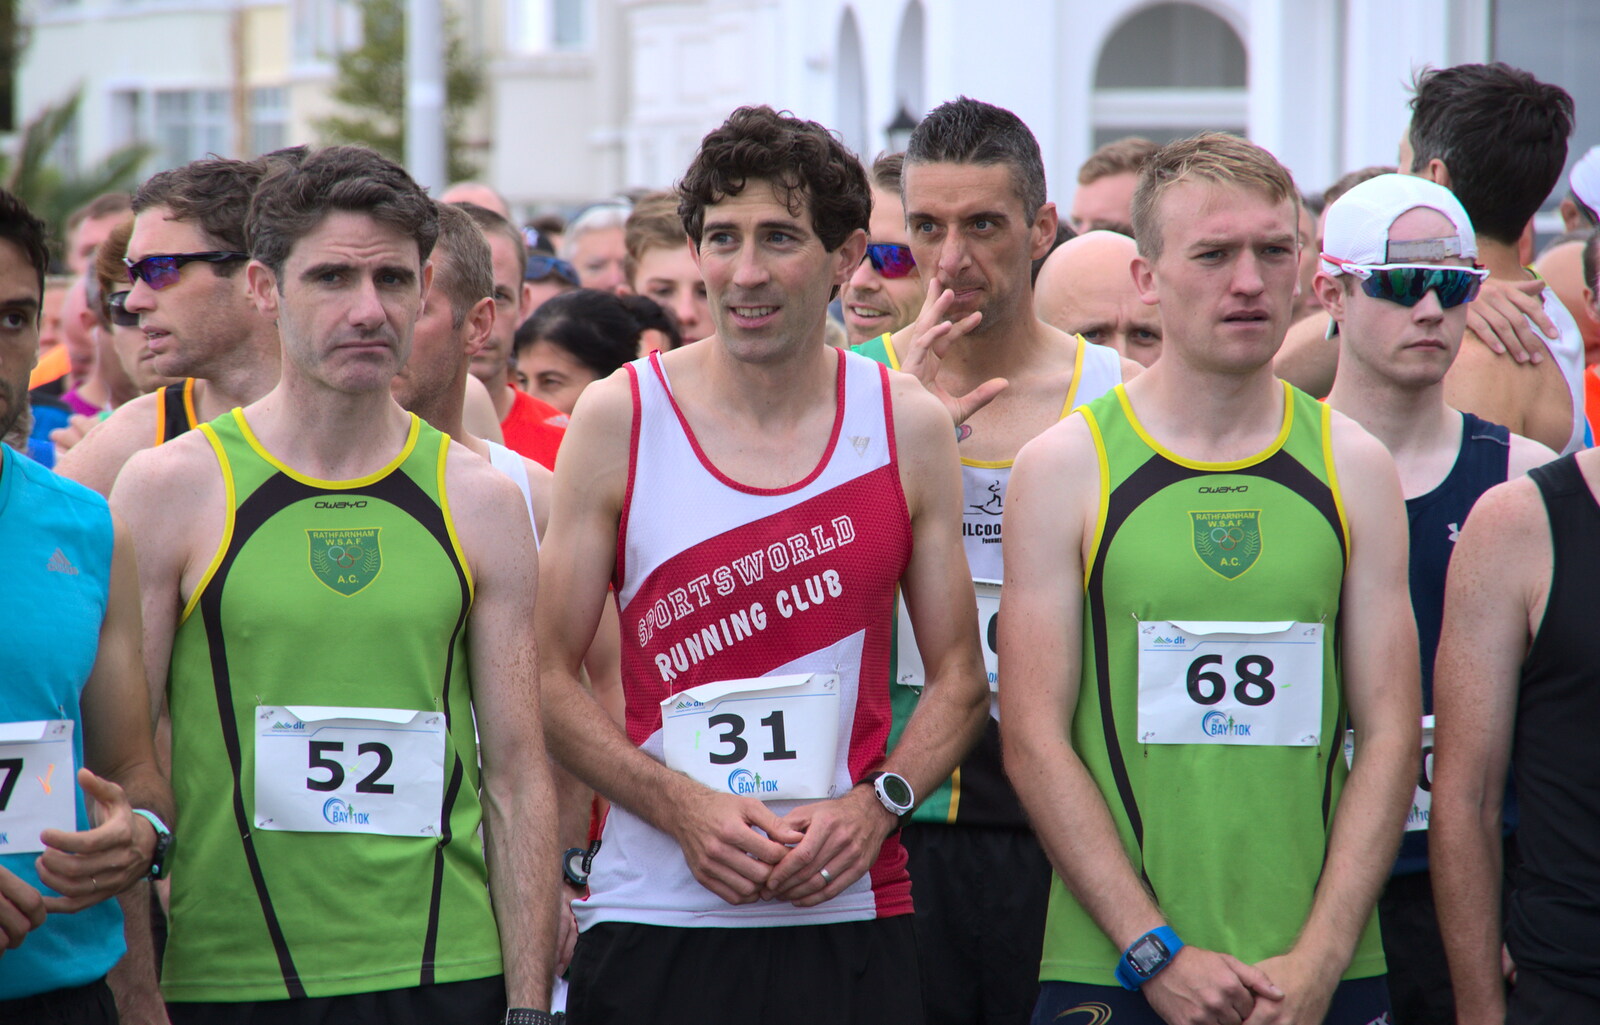 The runners prepare from The Dún Laoghaire 10k Run, County Dublin, Ireland - 6th August 2018